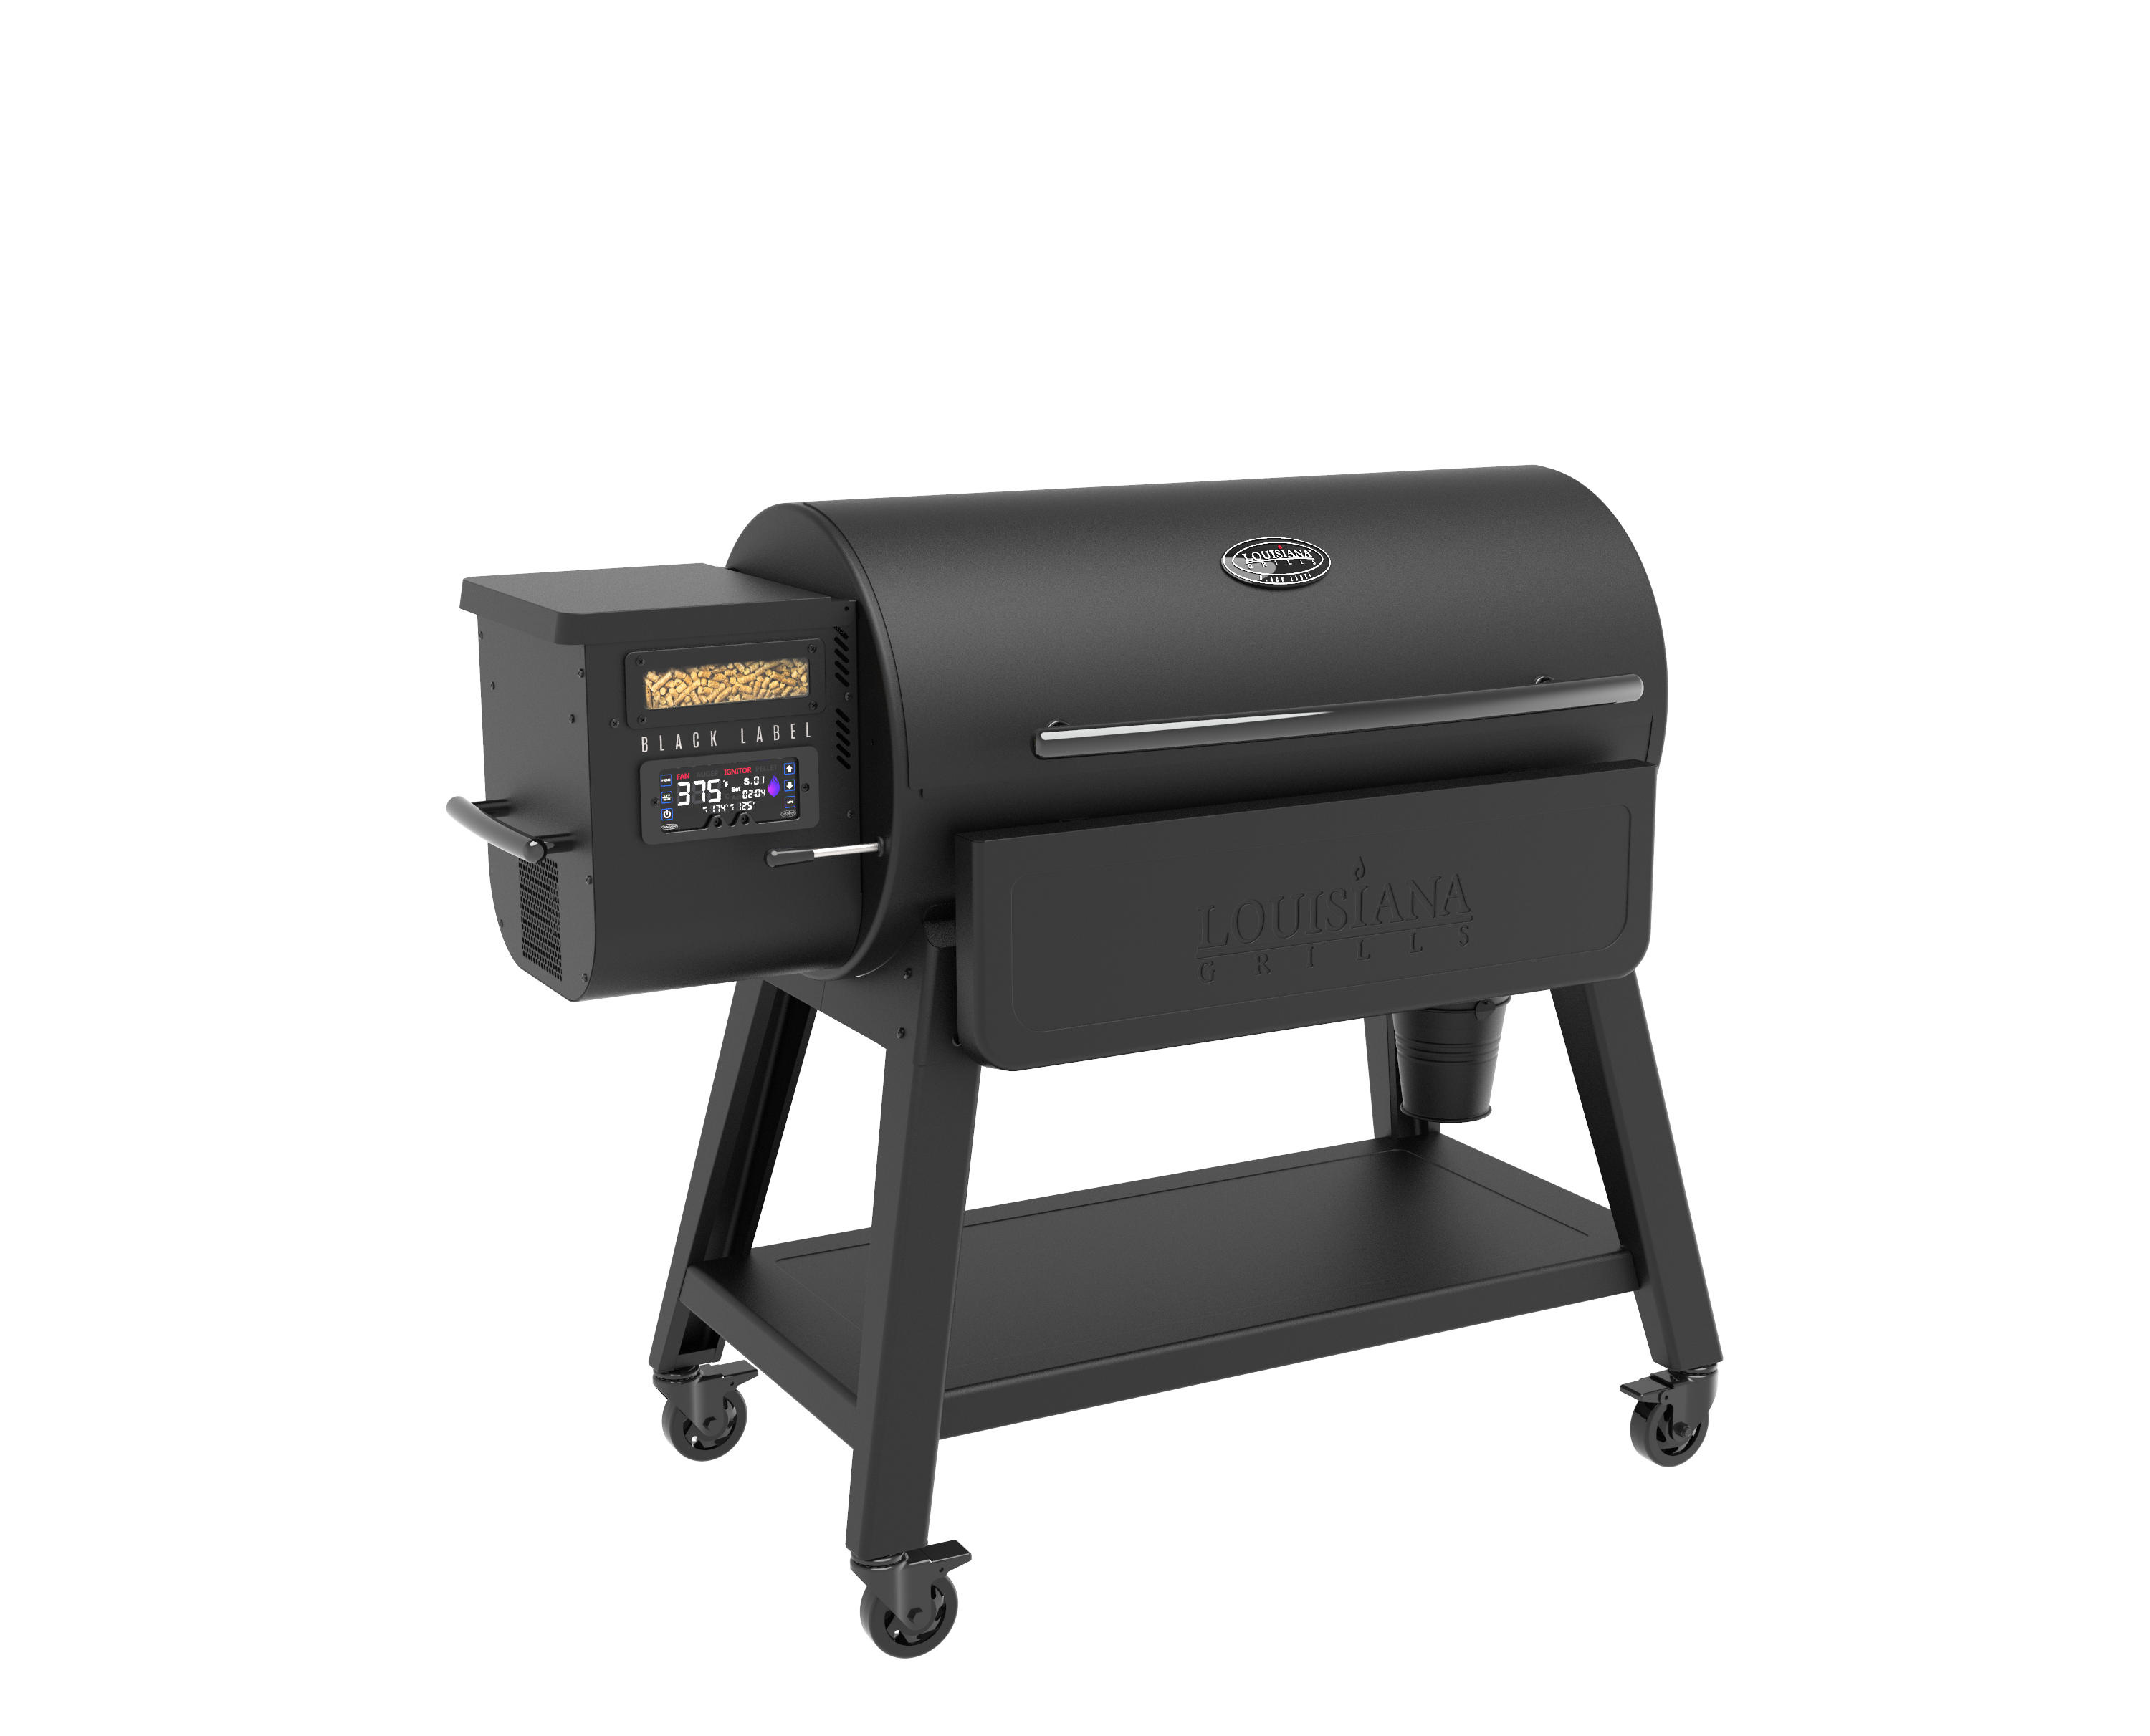 Black Label 1200 Wood Pellet Grill & Smoker by Louisiana Grills - LG1200BL - CLEARANCE (Store Pick Up ONLY!)